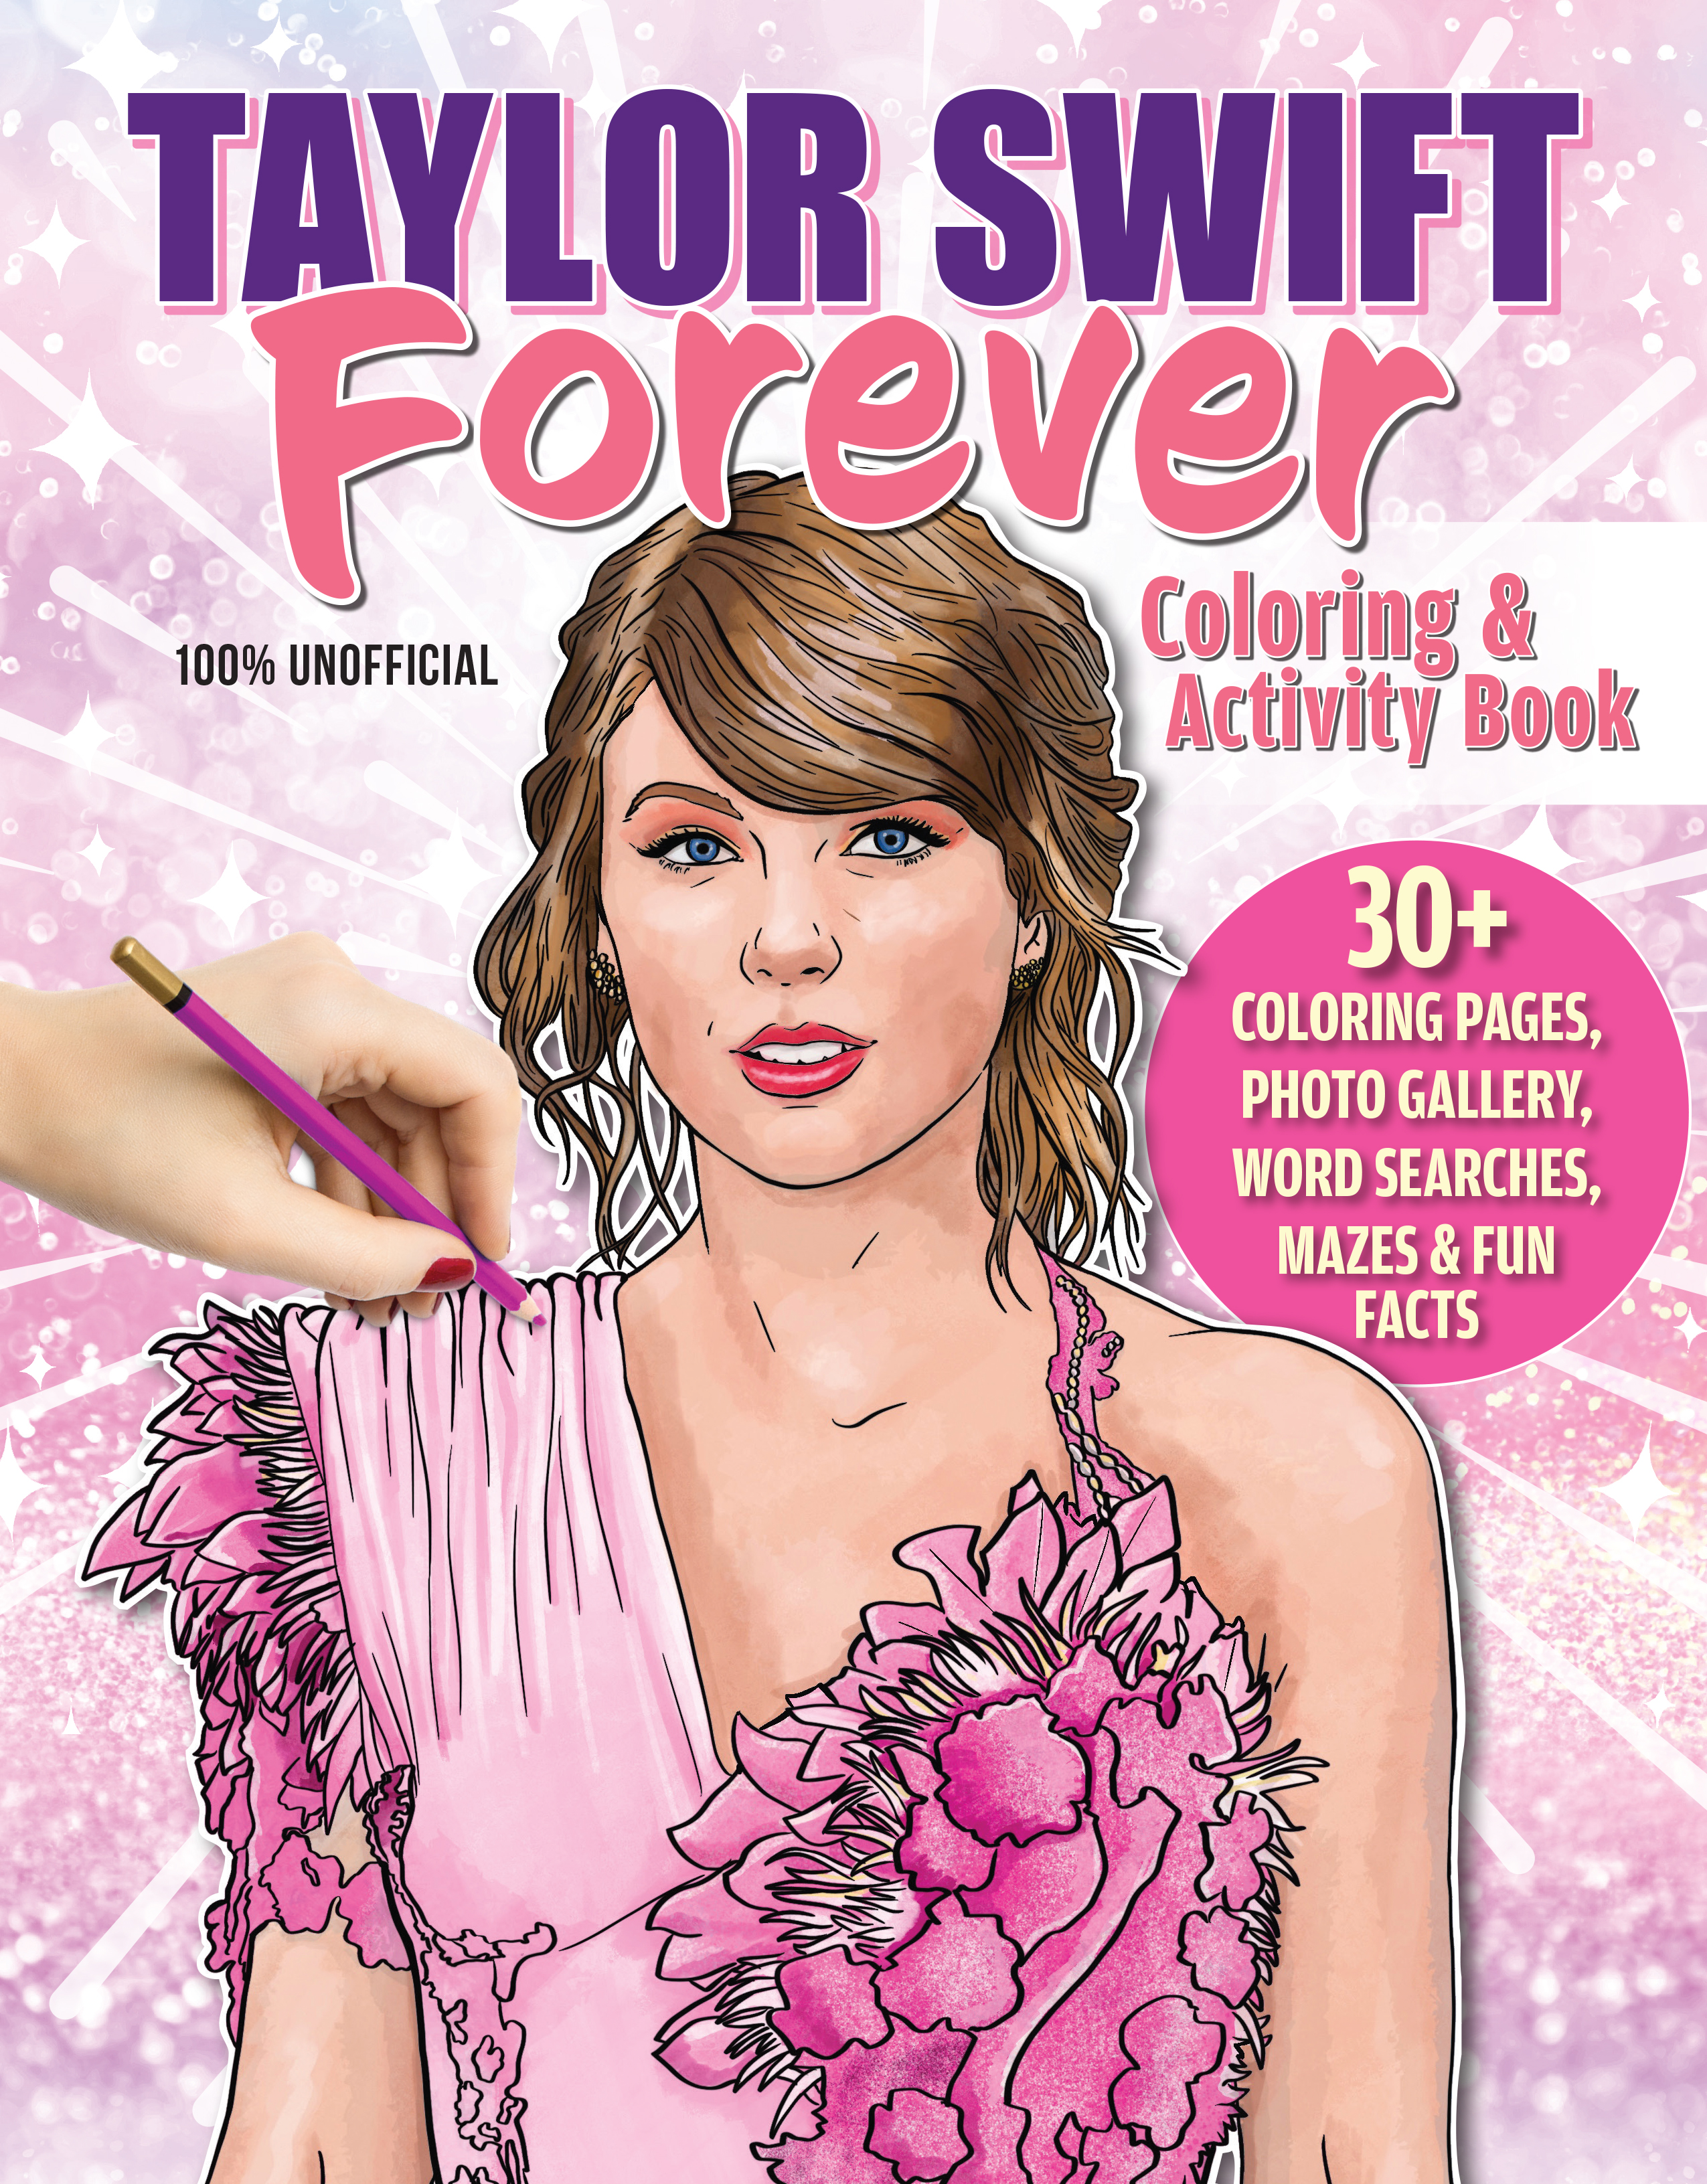 Taylor Swift Forever Coloring & Activity Book